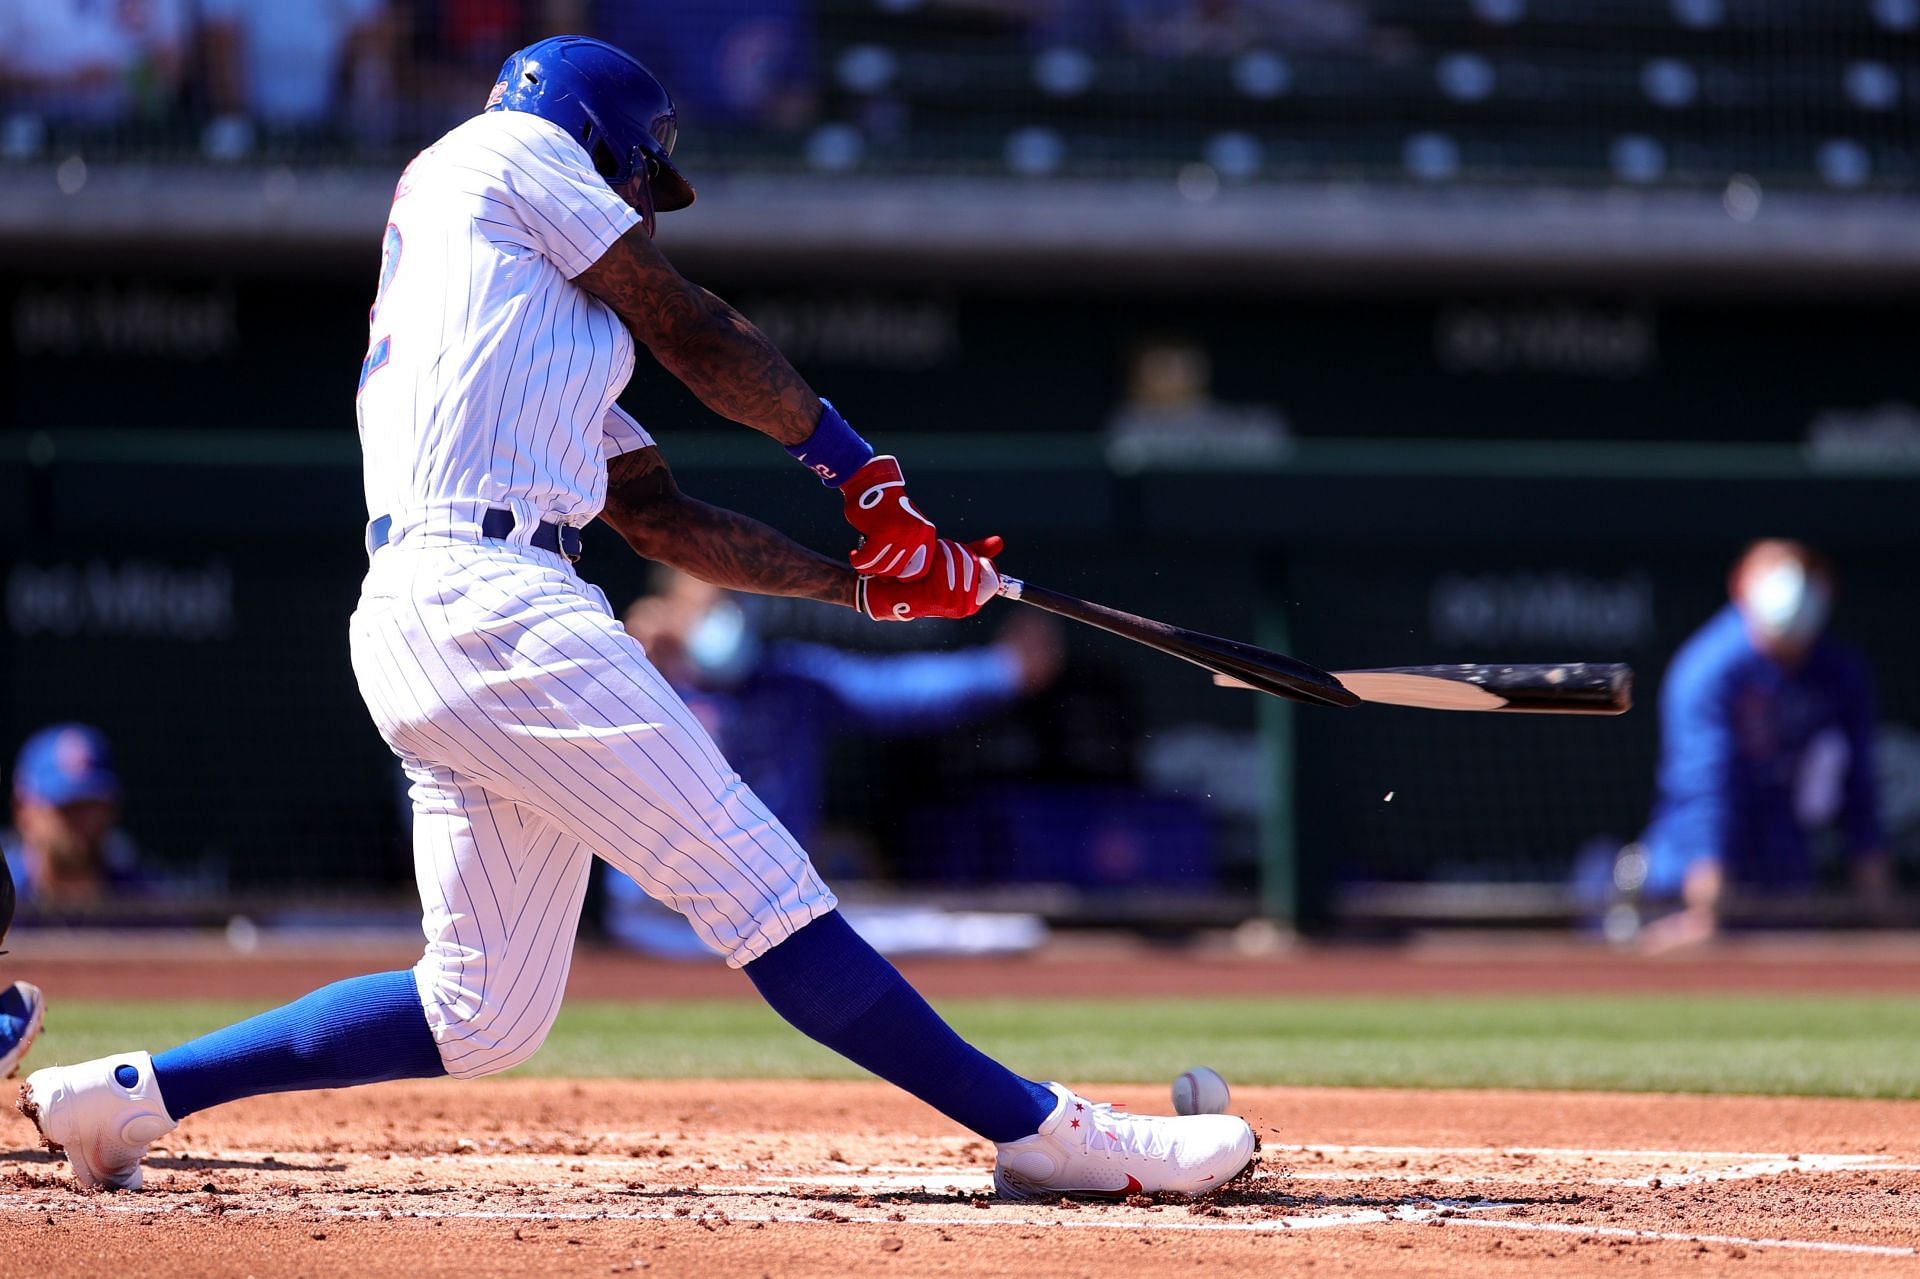 Jason Heyward is already in the best shape of his life